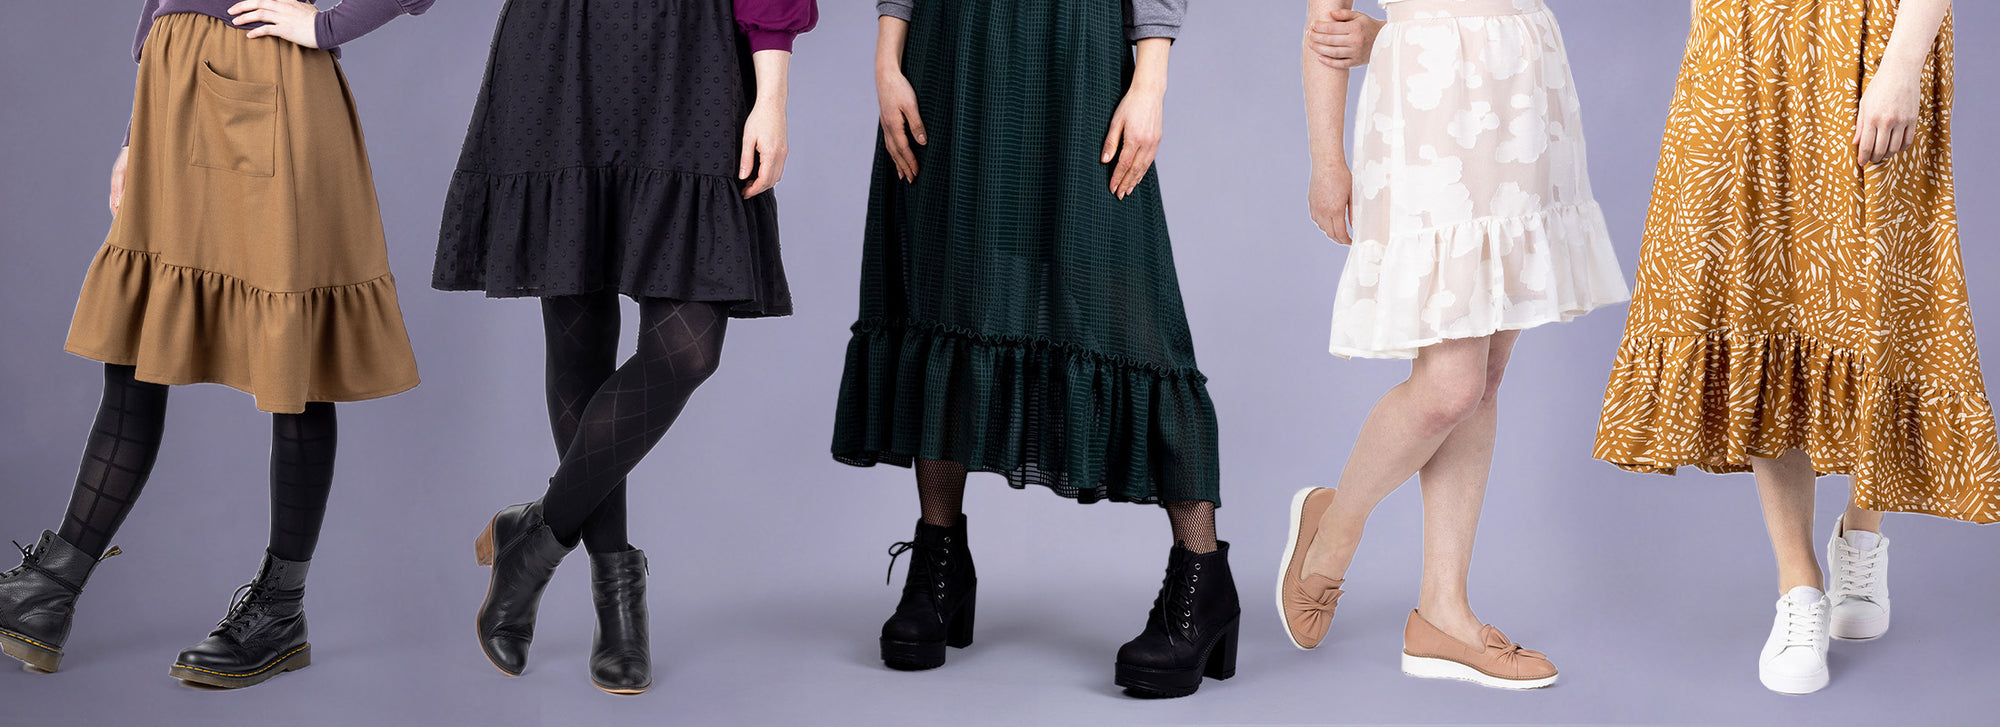 The Ella skirt in 5 styles and different lengths